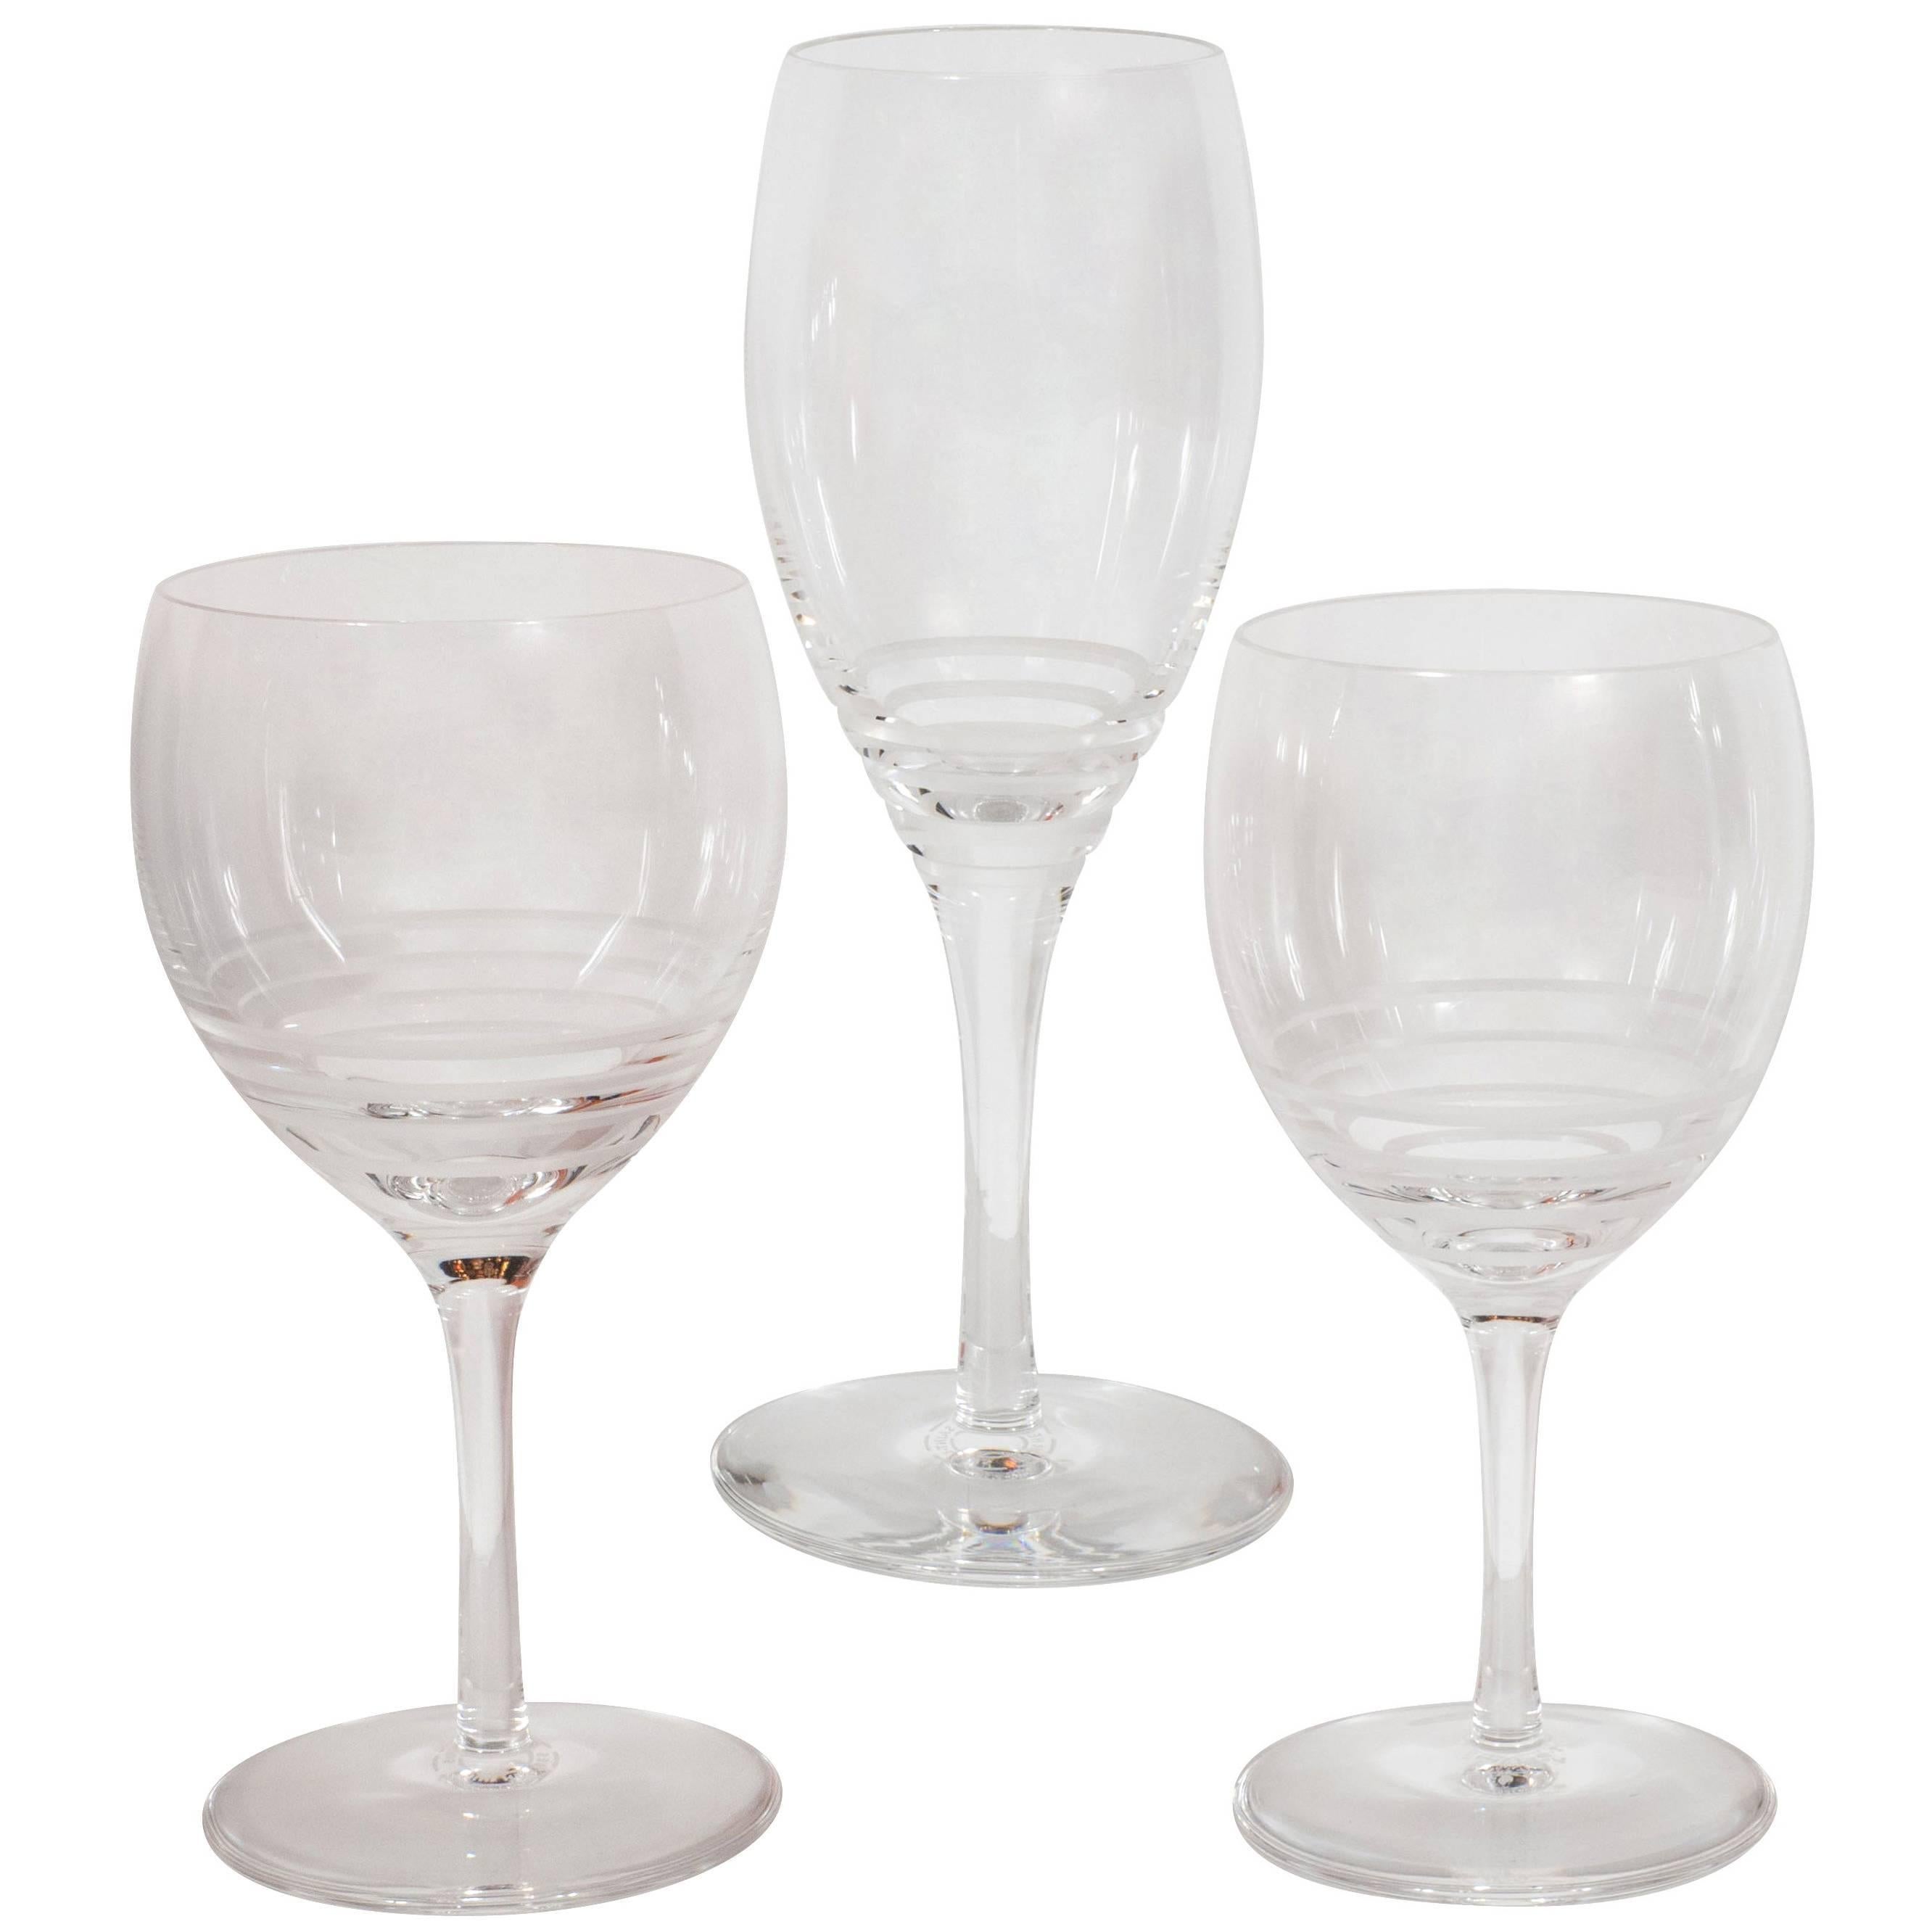 Suite of 12 Red, White and Champagne Crystal Glasses by Saint-Louis for Hermes